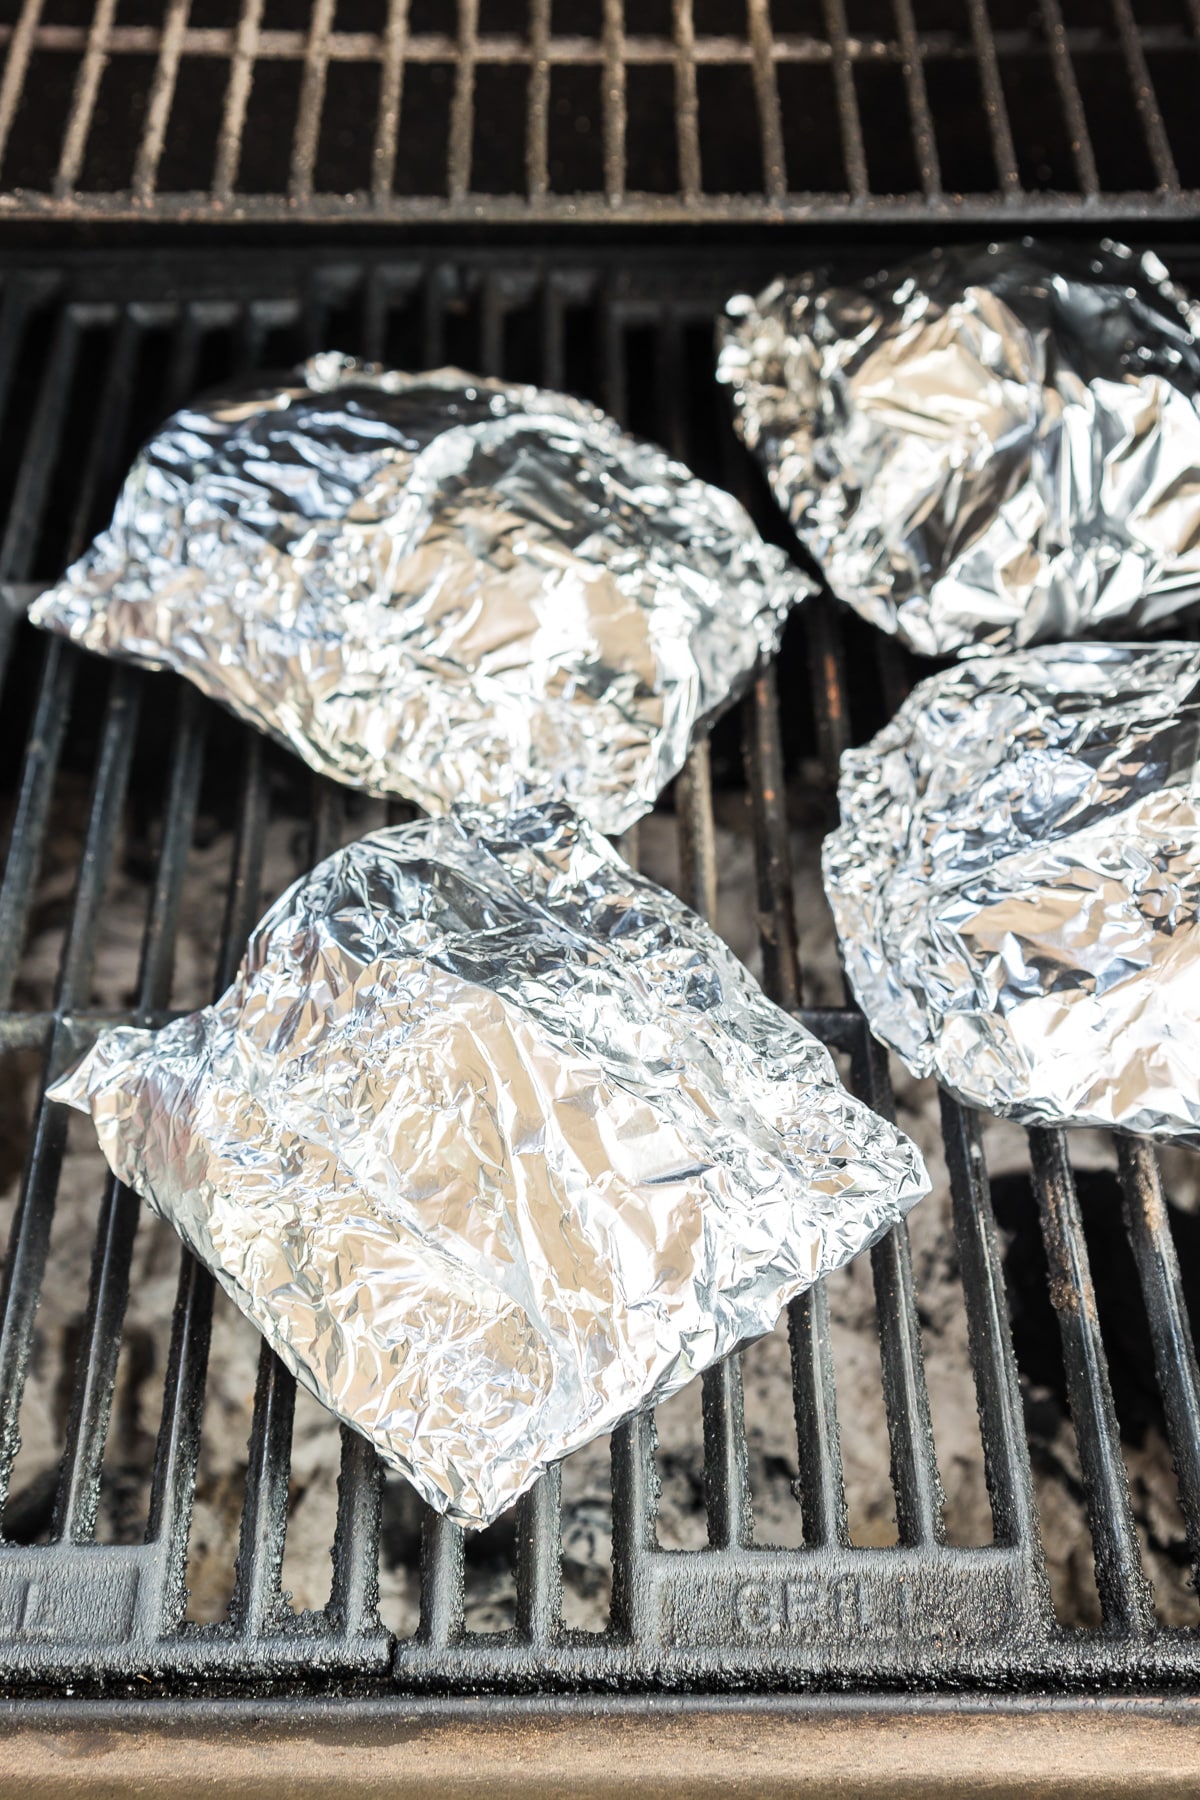 Foil wrapped packets on the grill.